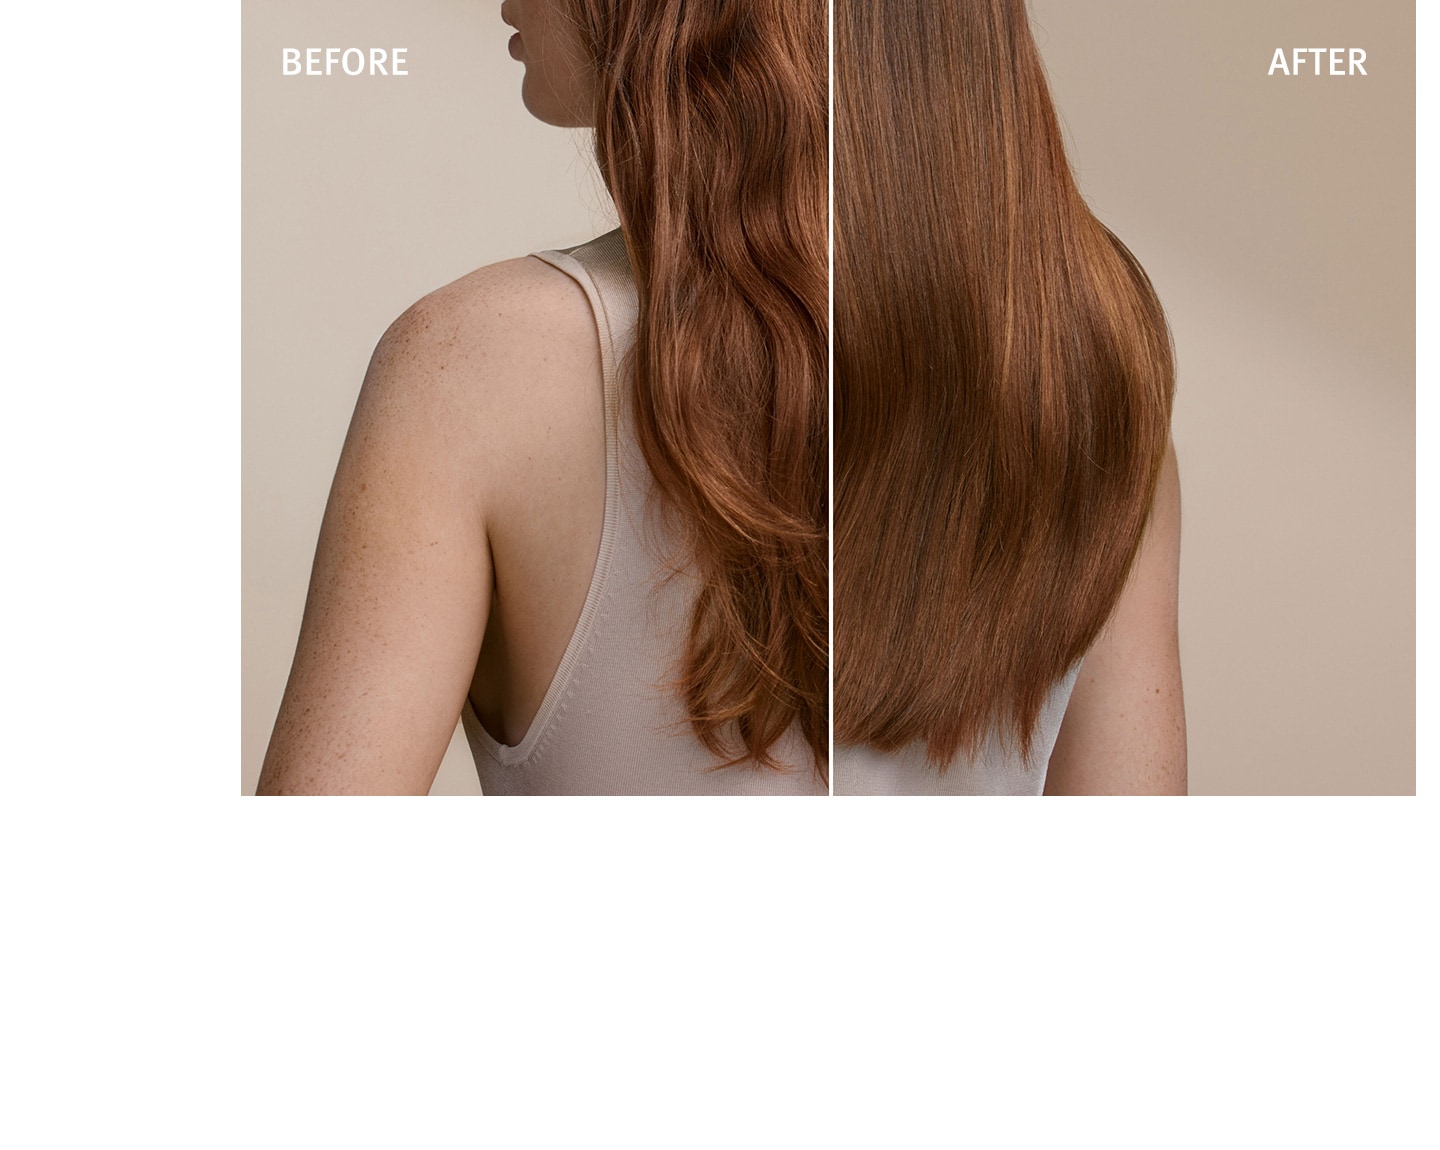 See the difference with nutriplenish light formula hair care for dry hair